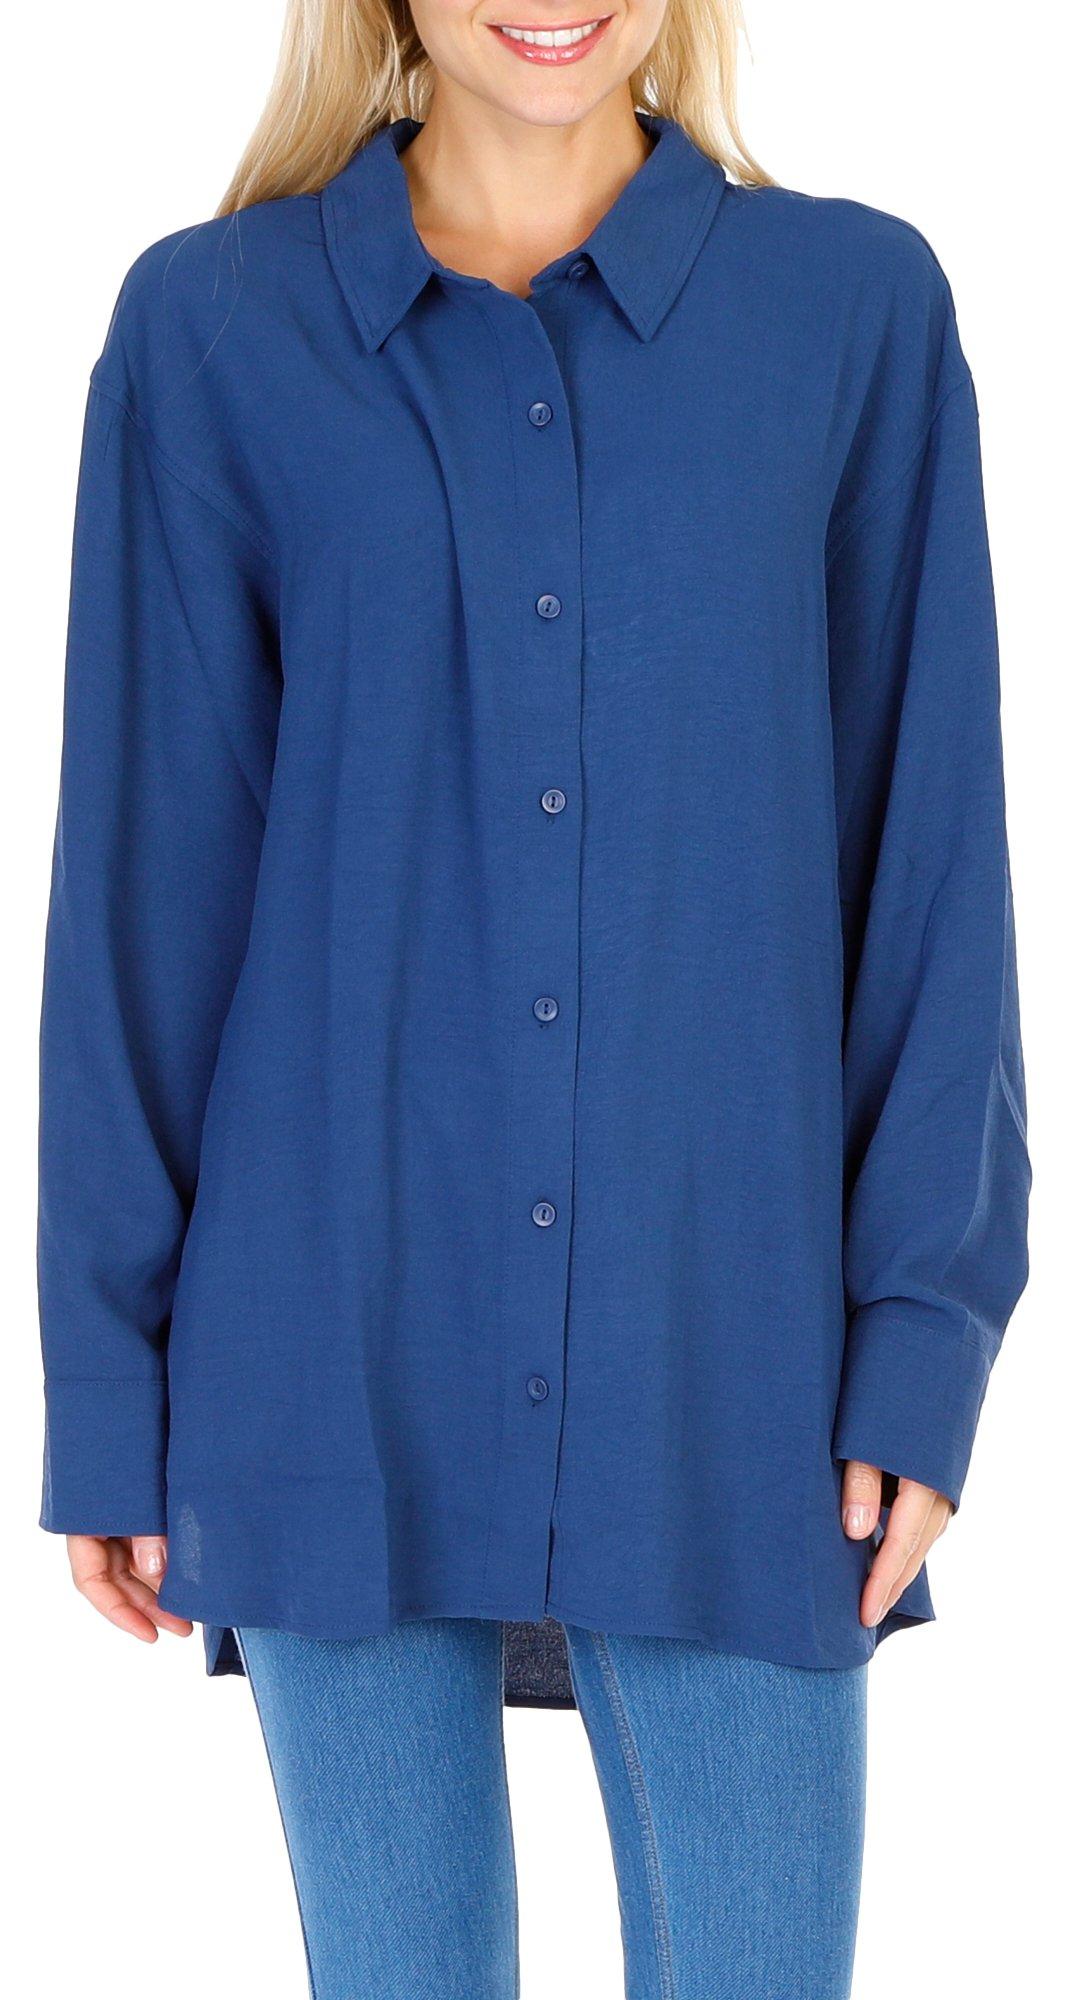 Juniors Solid Long Sleeve Button Down Top